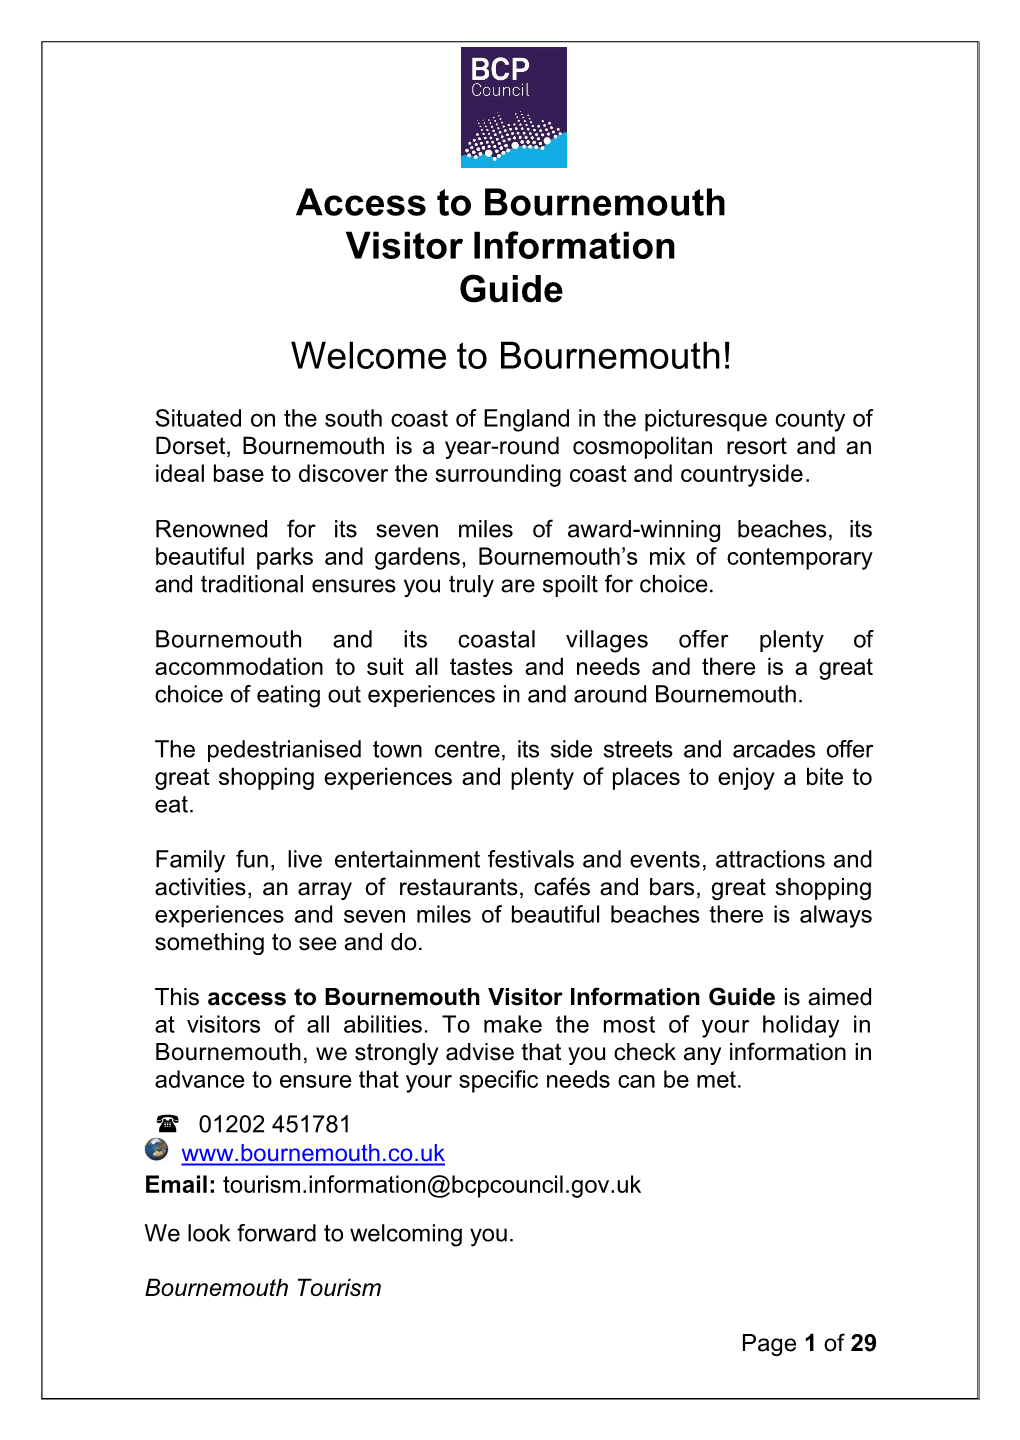 Access to Bournemouth Visitor Information Guide Welcome to Bournemouth!